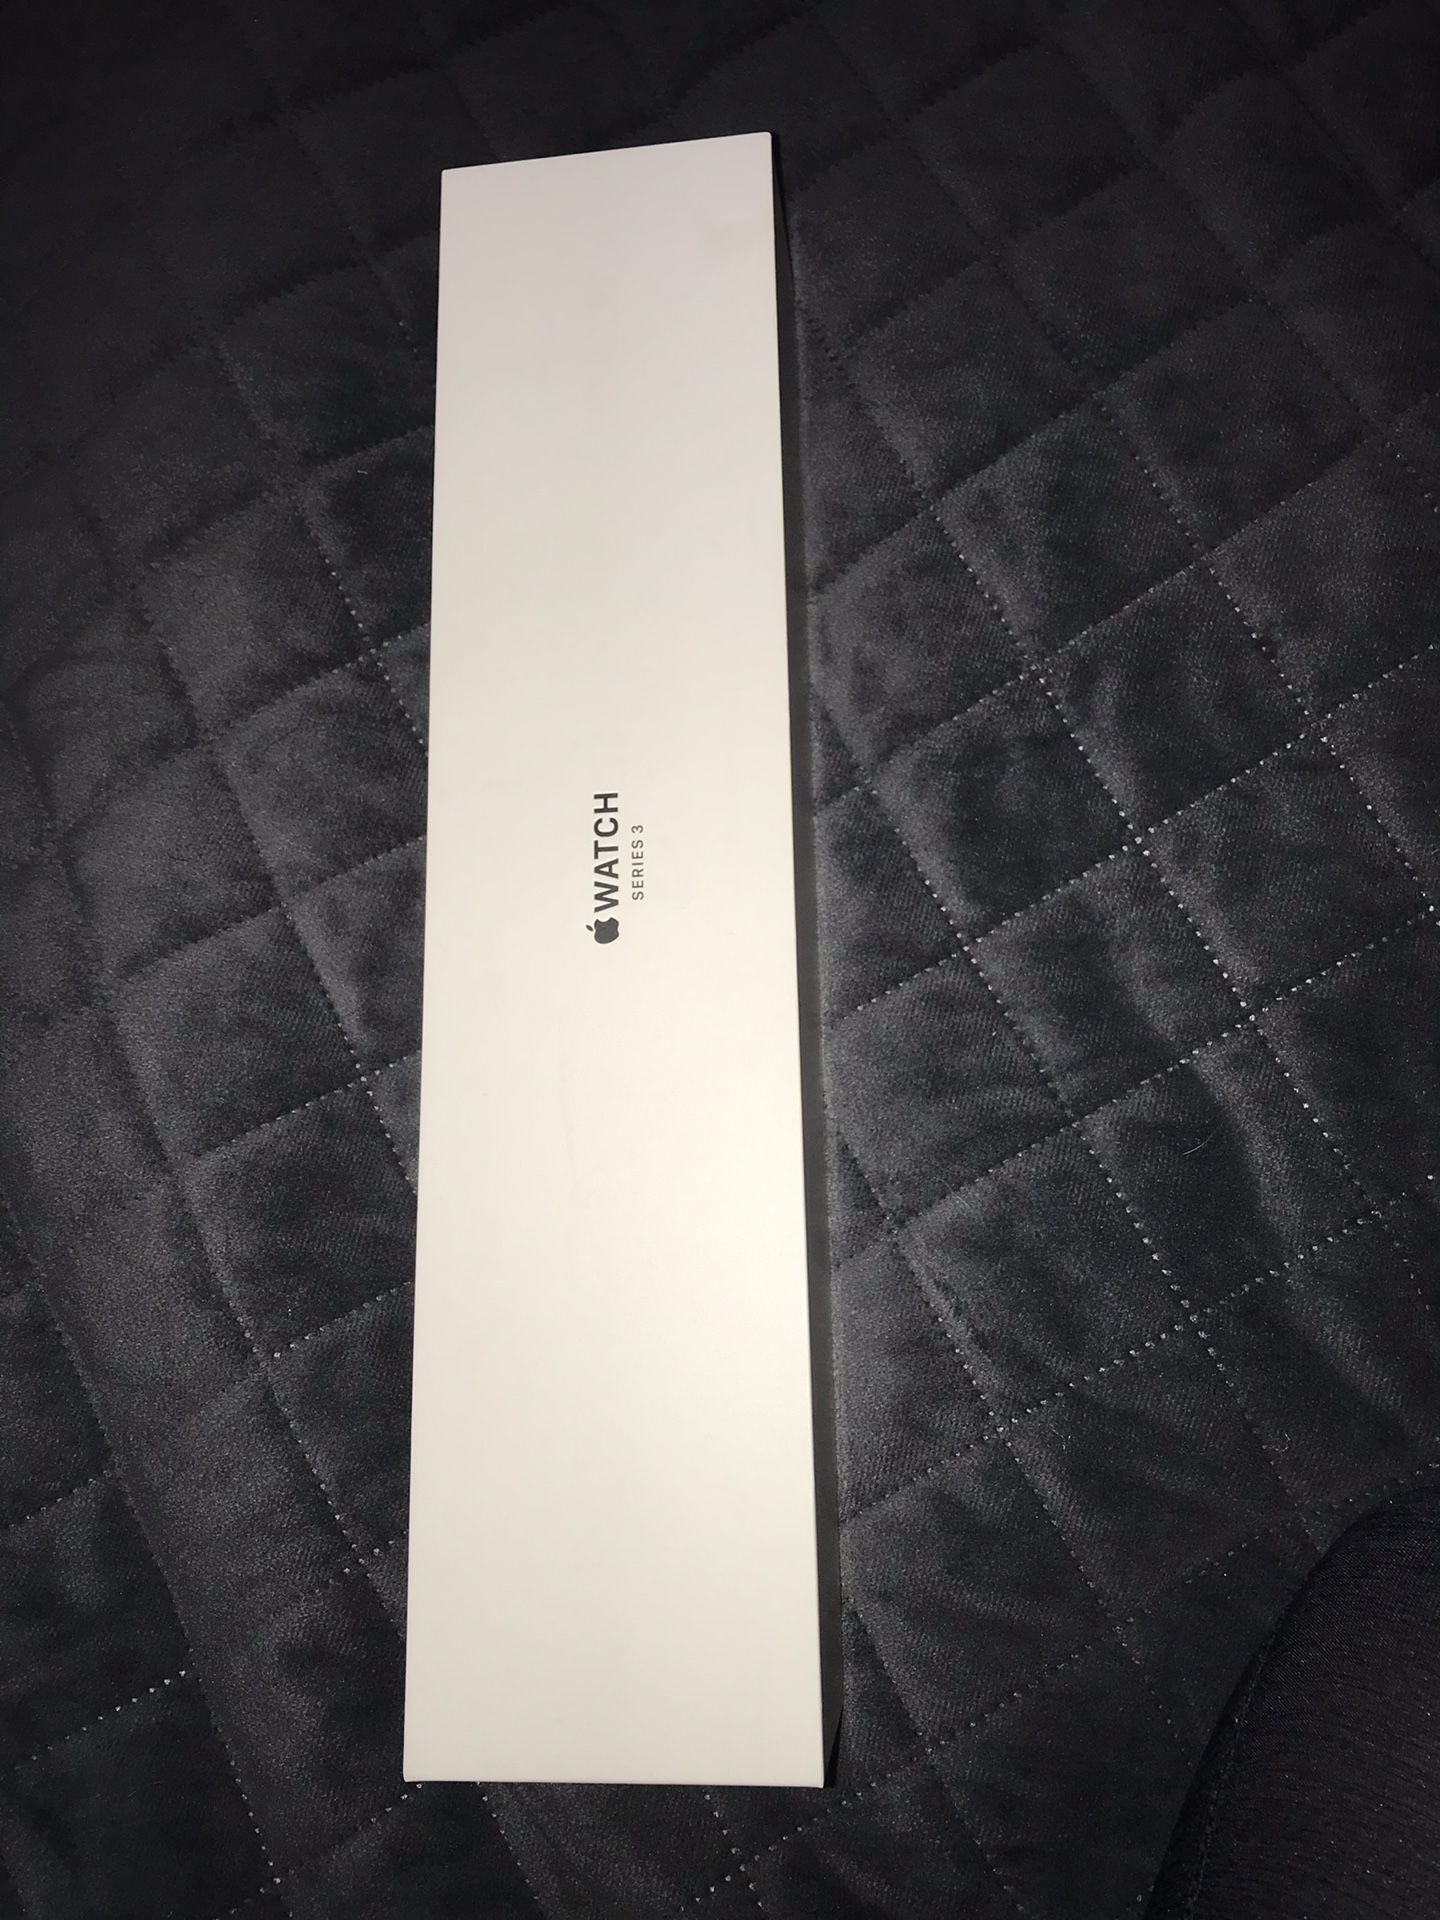 Apple Watch Series 3 with Apple Care